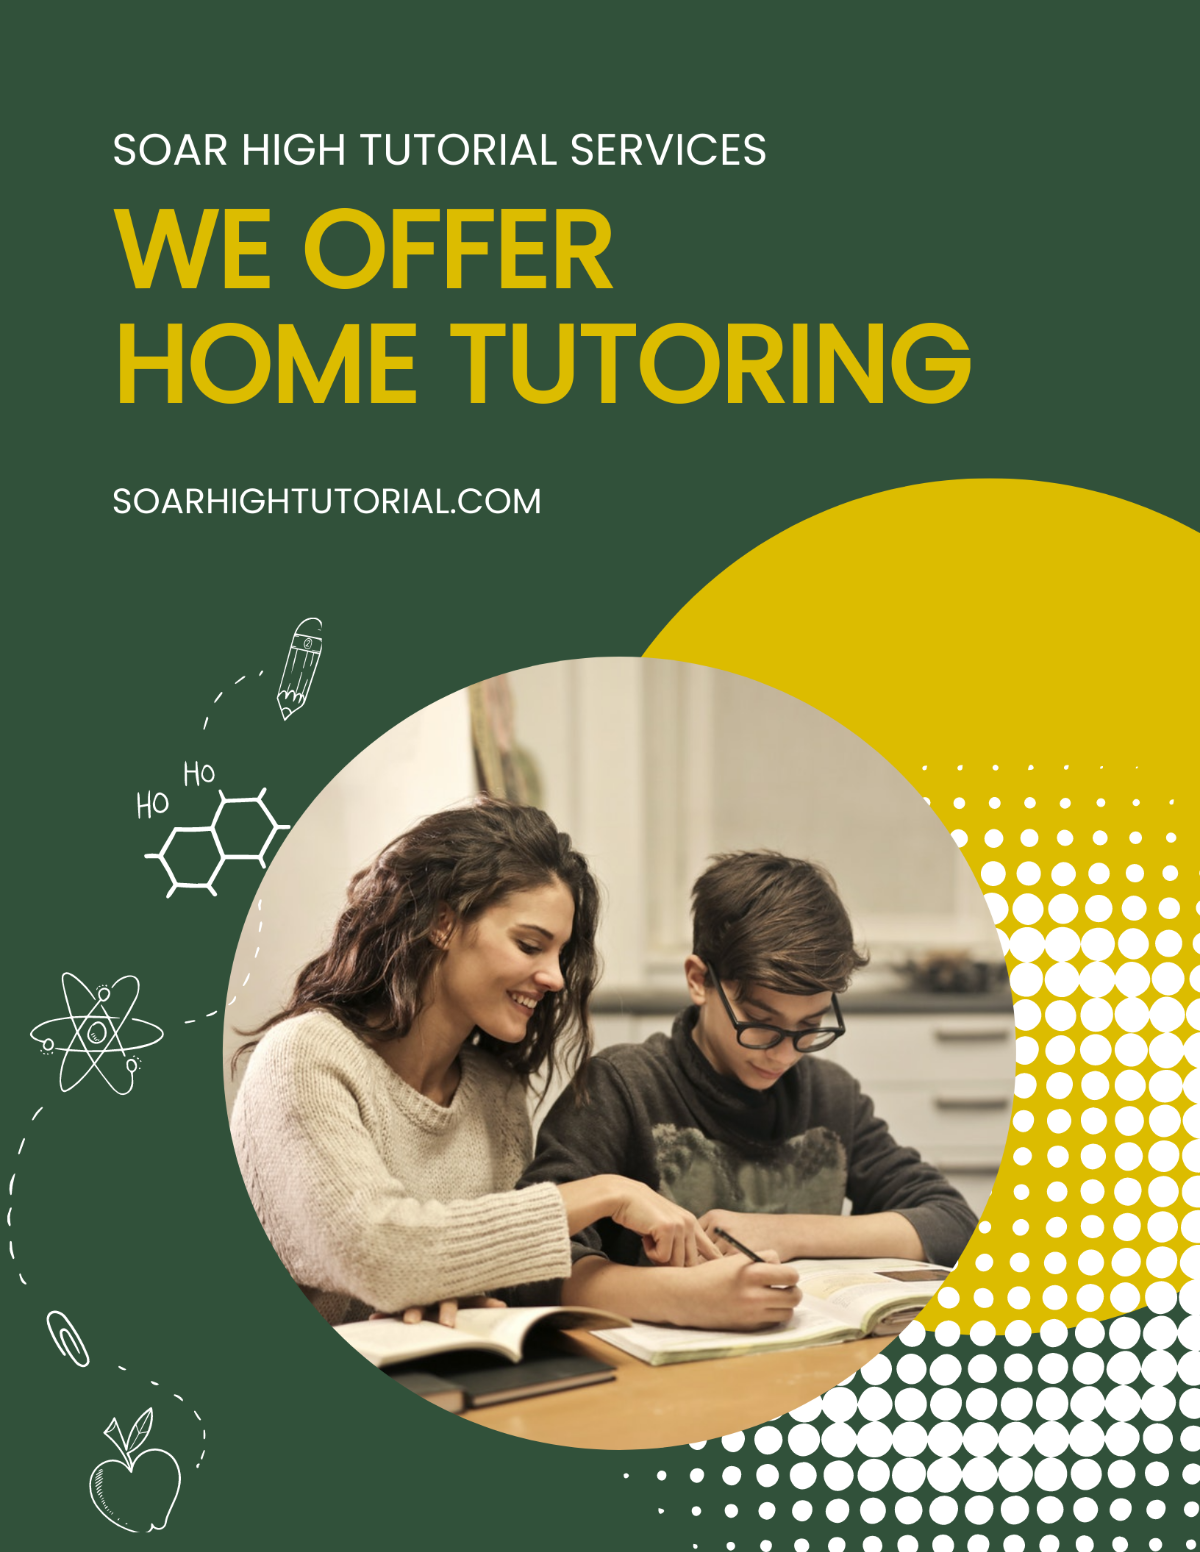 Home Tutoring Flyer Template